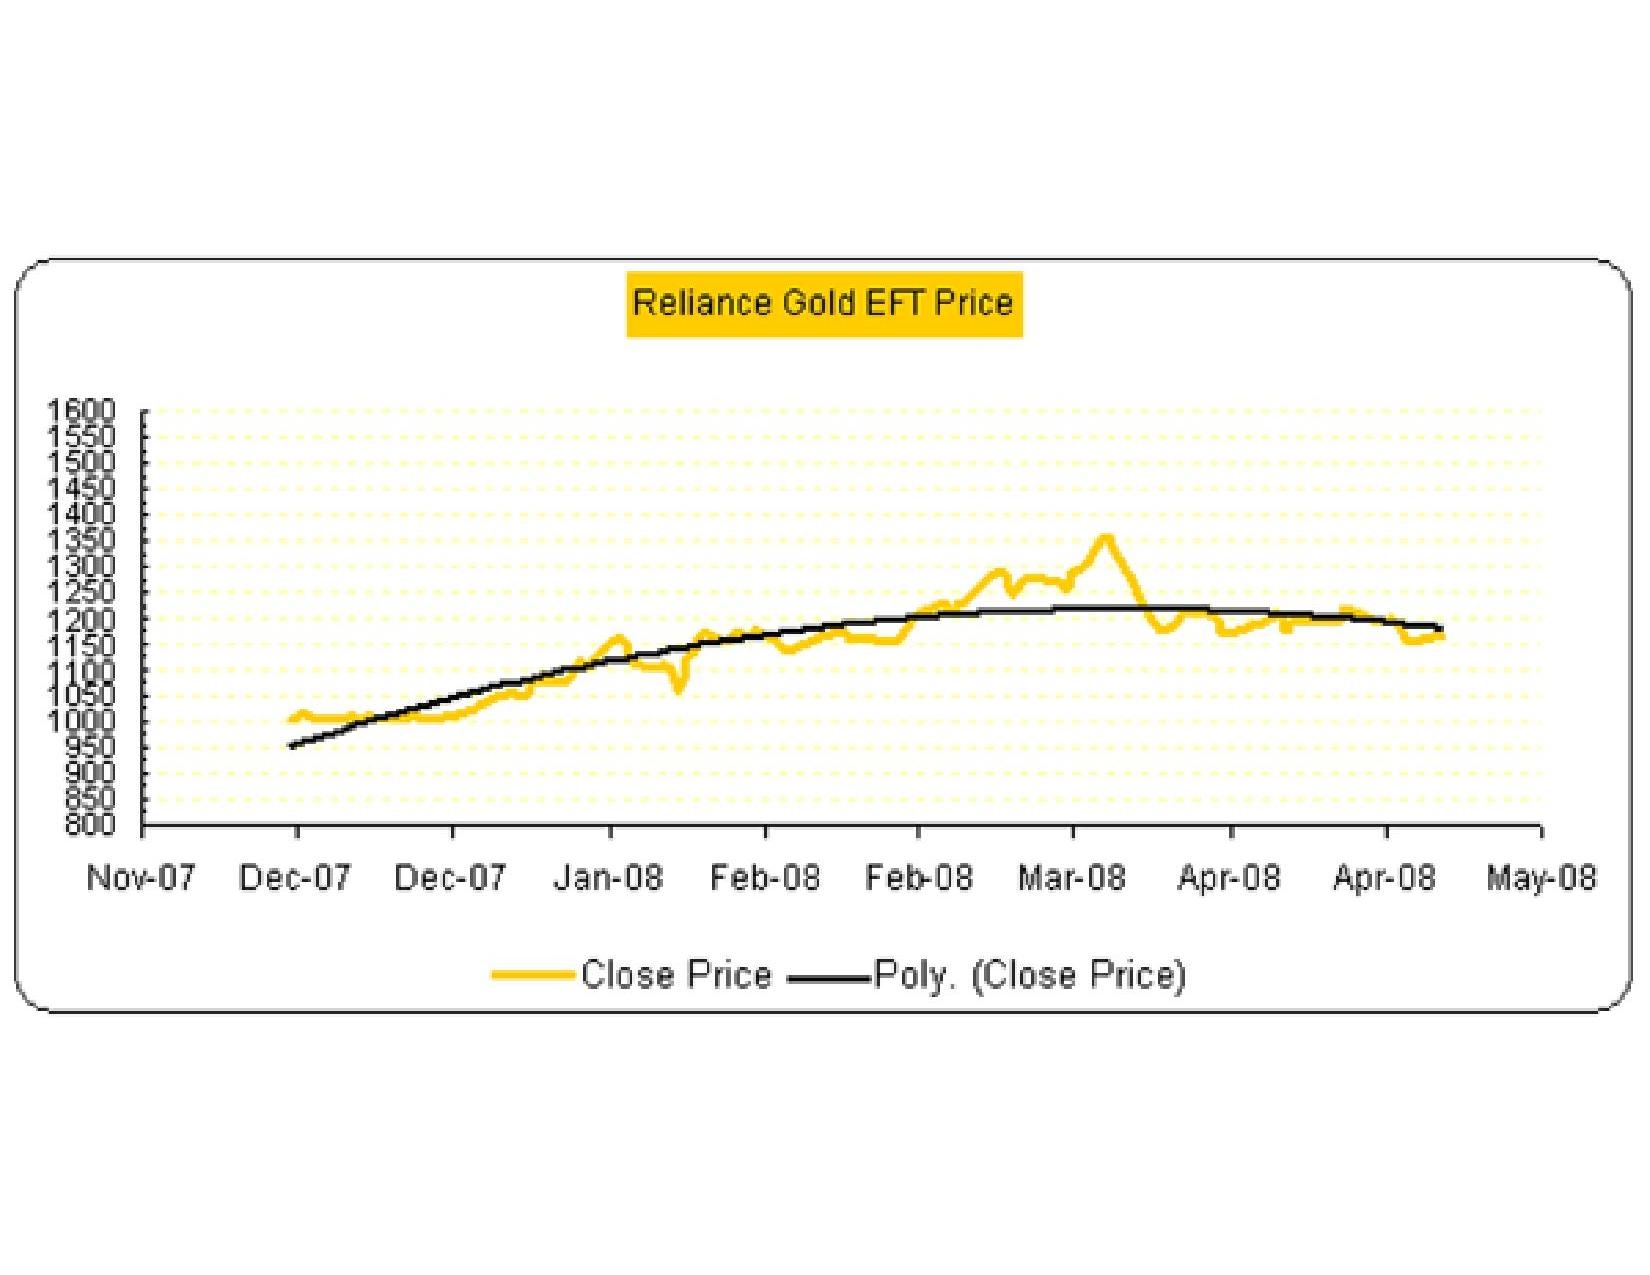 Reliance Gold ETF Price movement chart | www.OnlineMF.in